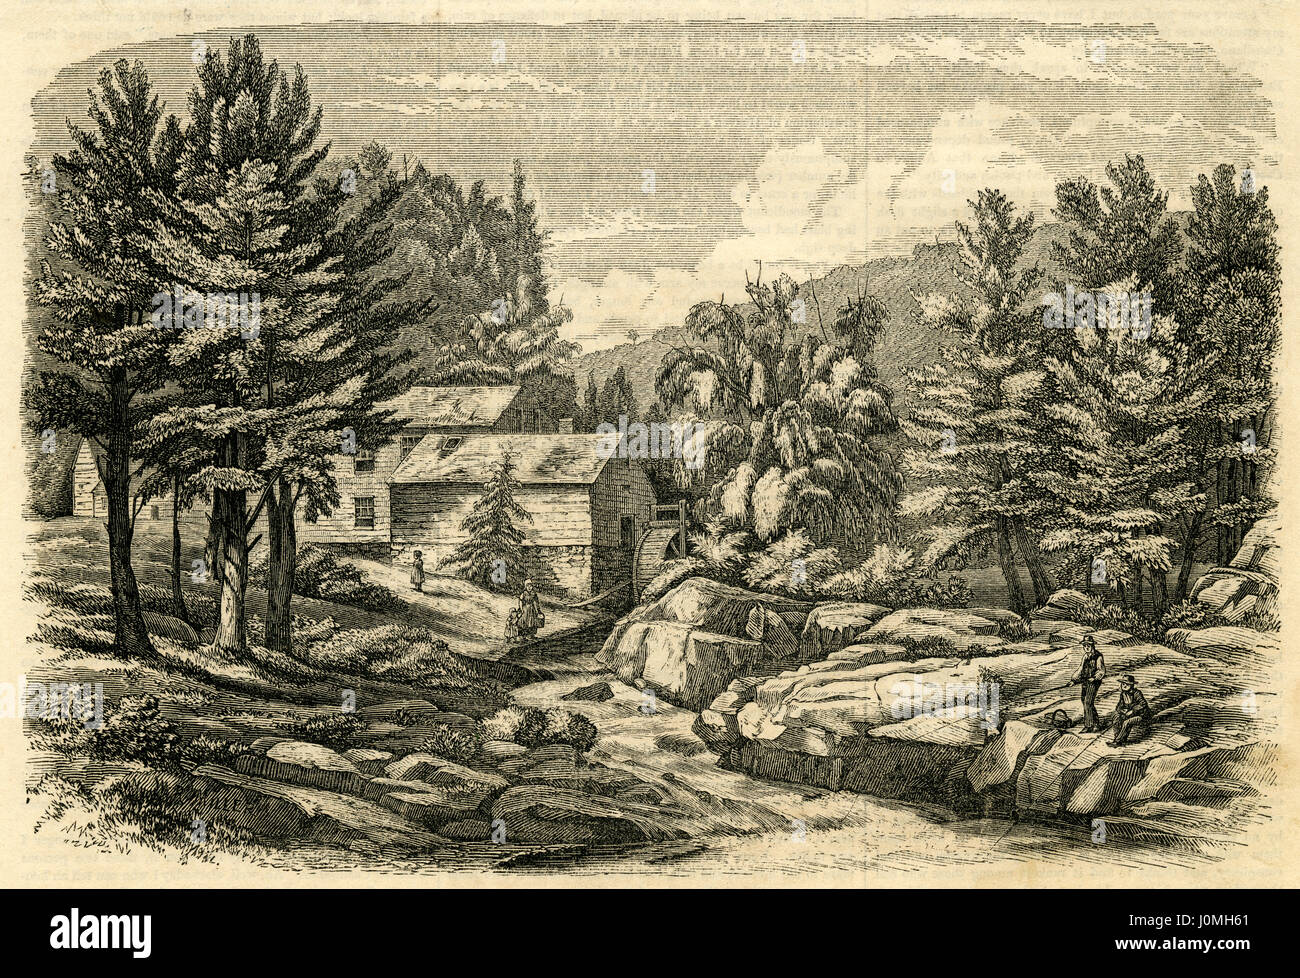 Antique 1854 engraving, 'Mill in the Valley of the Mohawk River, New York.' The Mohawk River is a 149-mile-long (240 km) river in the U.S. state of New York. It is the largest tributary of the Hudson River. The river is named for the Mohawk Nation of the Iroquois Confederacy. SOURCE: ORIGINAL ENGRAVING. Stock Photo